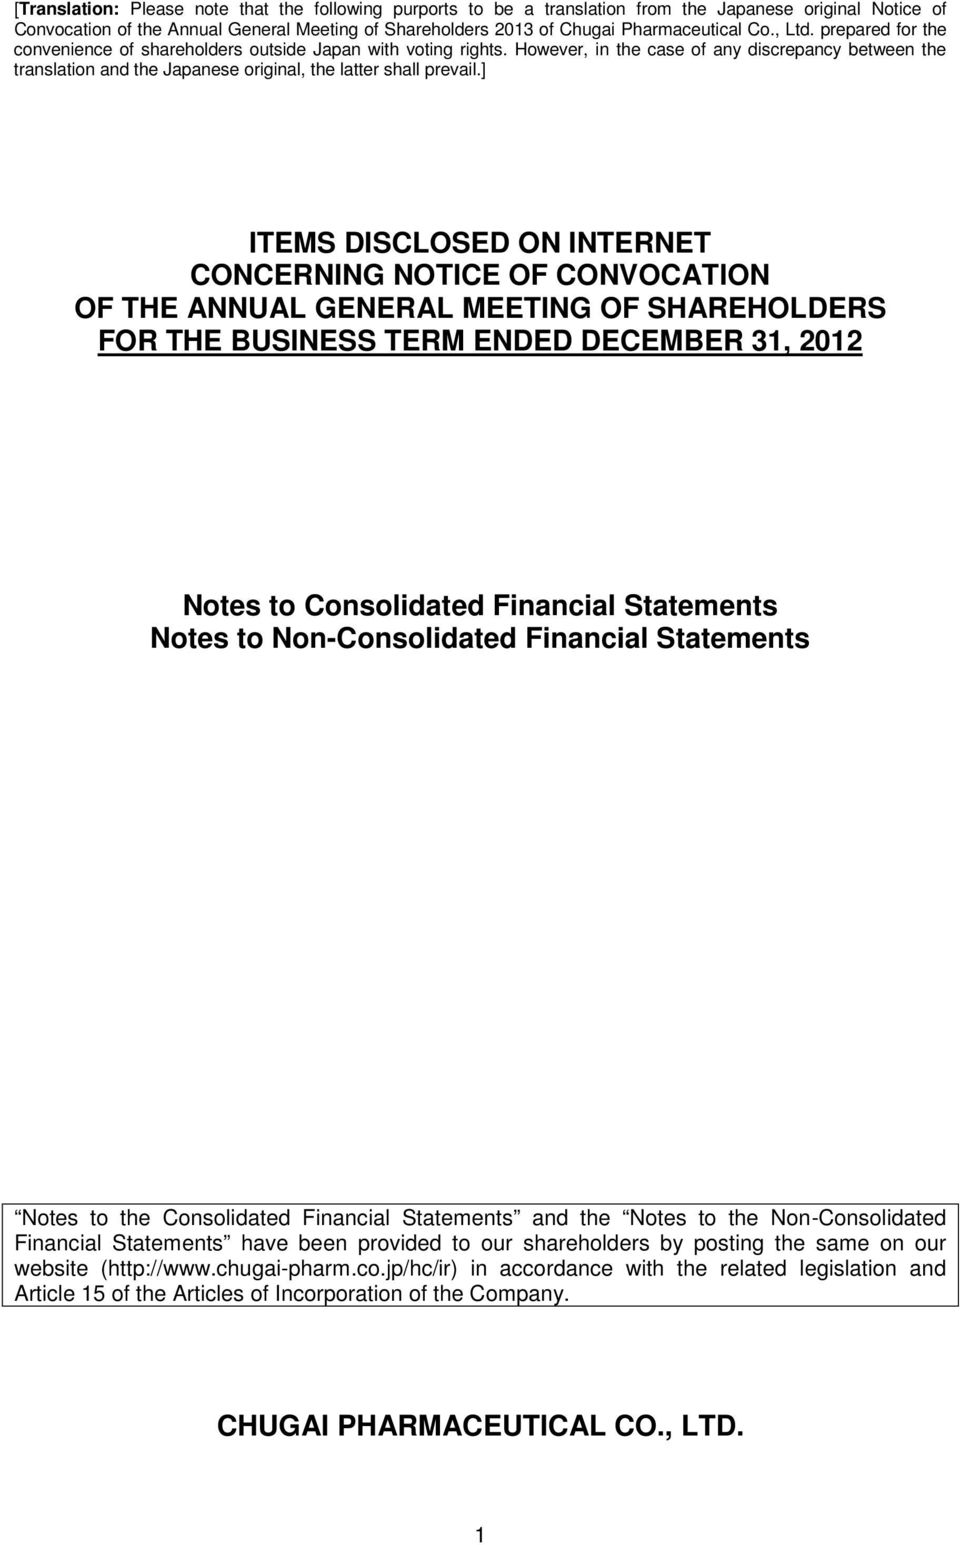 ] ITEMS DISCLOSED ON INTERNET CONCERNING NOTICE OF CONVOCATION OF THE ANNUAL GENERAL MEETING OF SHAREHOLDERS FOR THE BUSINESS TERM ENDED DECEMBER 31, 2012 Notes to Consolidated Financial Statements